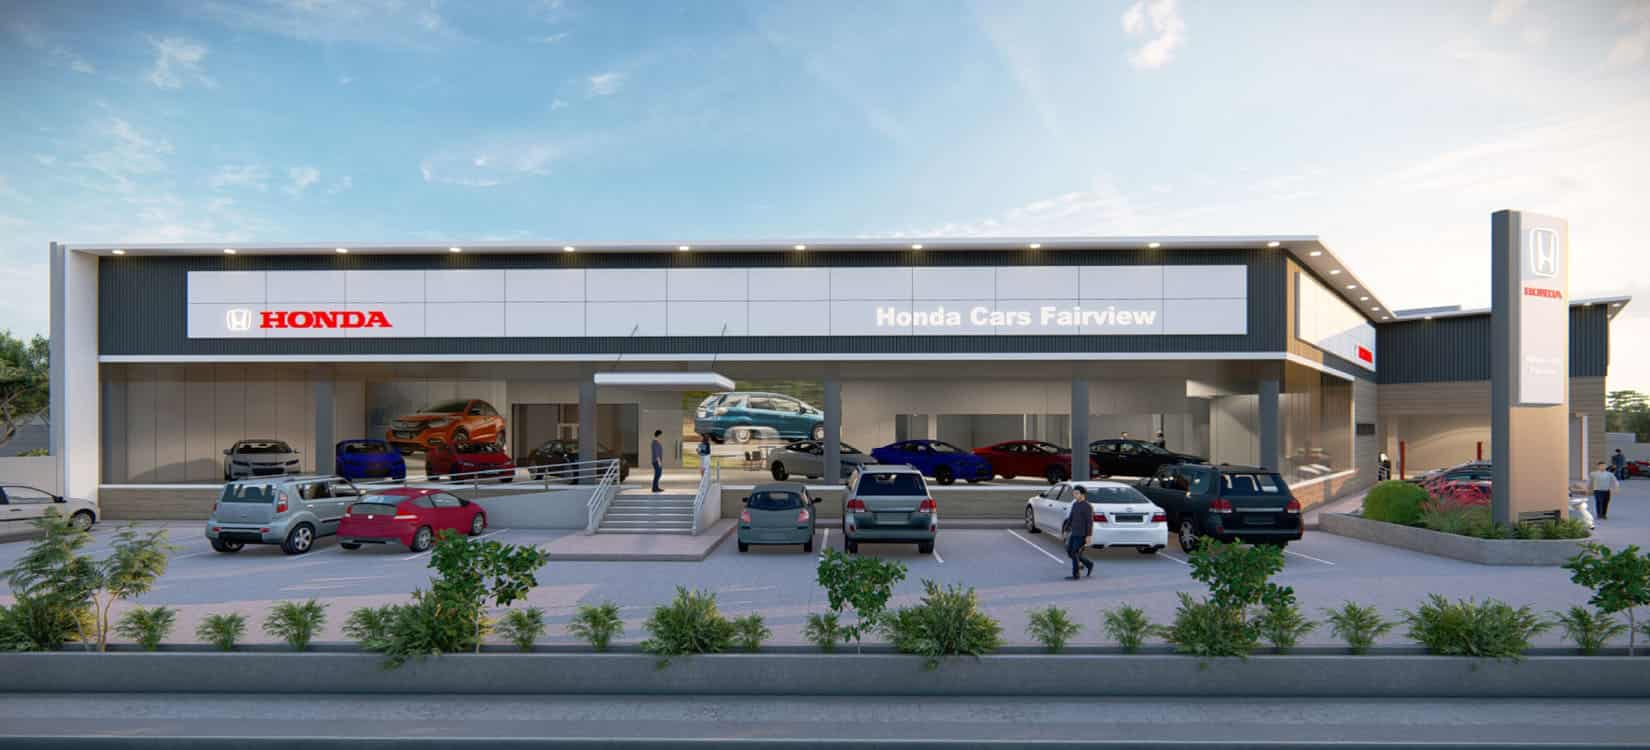 Honda Cars Fairview breaks ground of new location, to move to bigger site